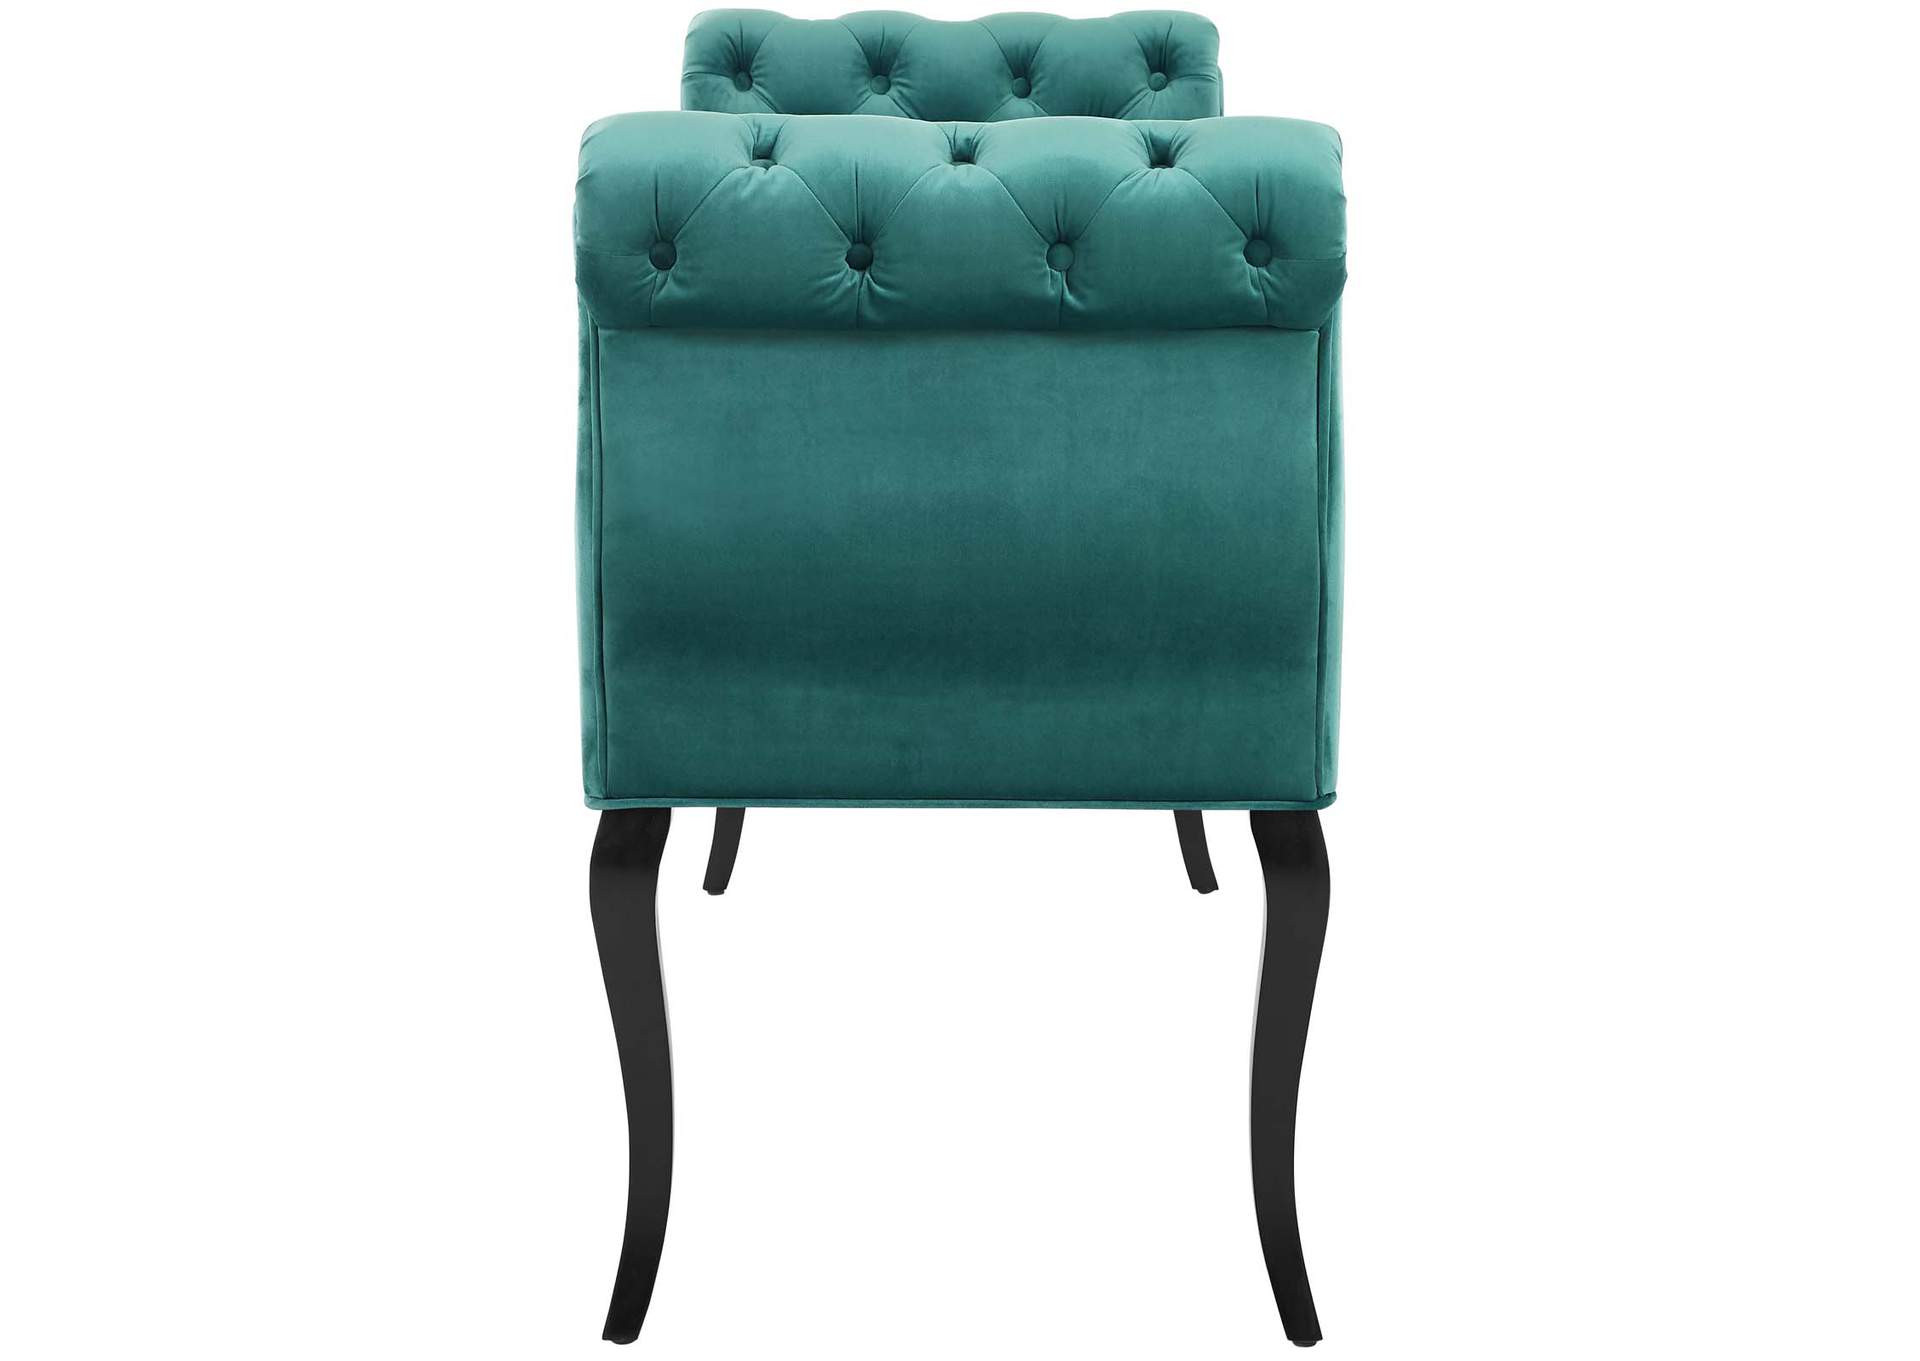 Teal Adelia Chesterfield Style Button Tufted Performance Velvet Bench,Modway